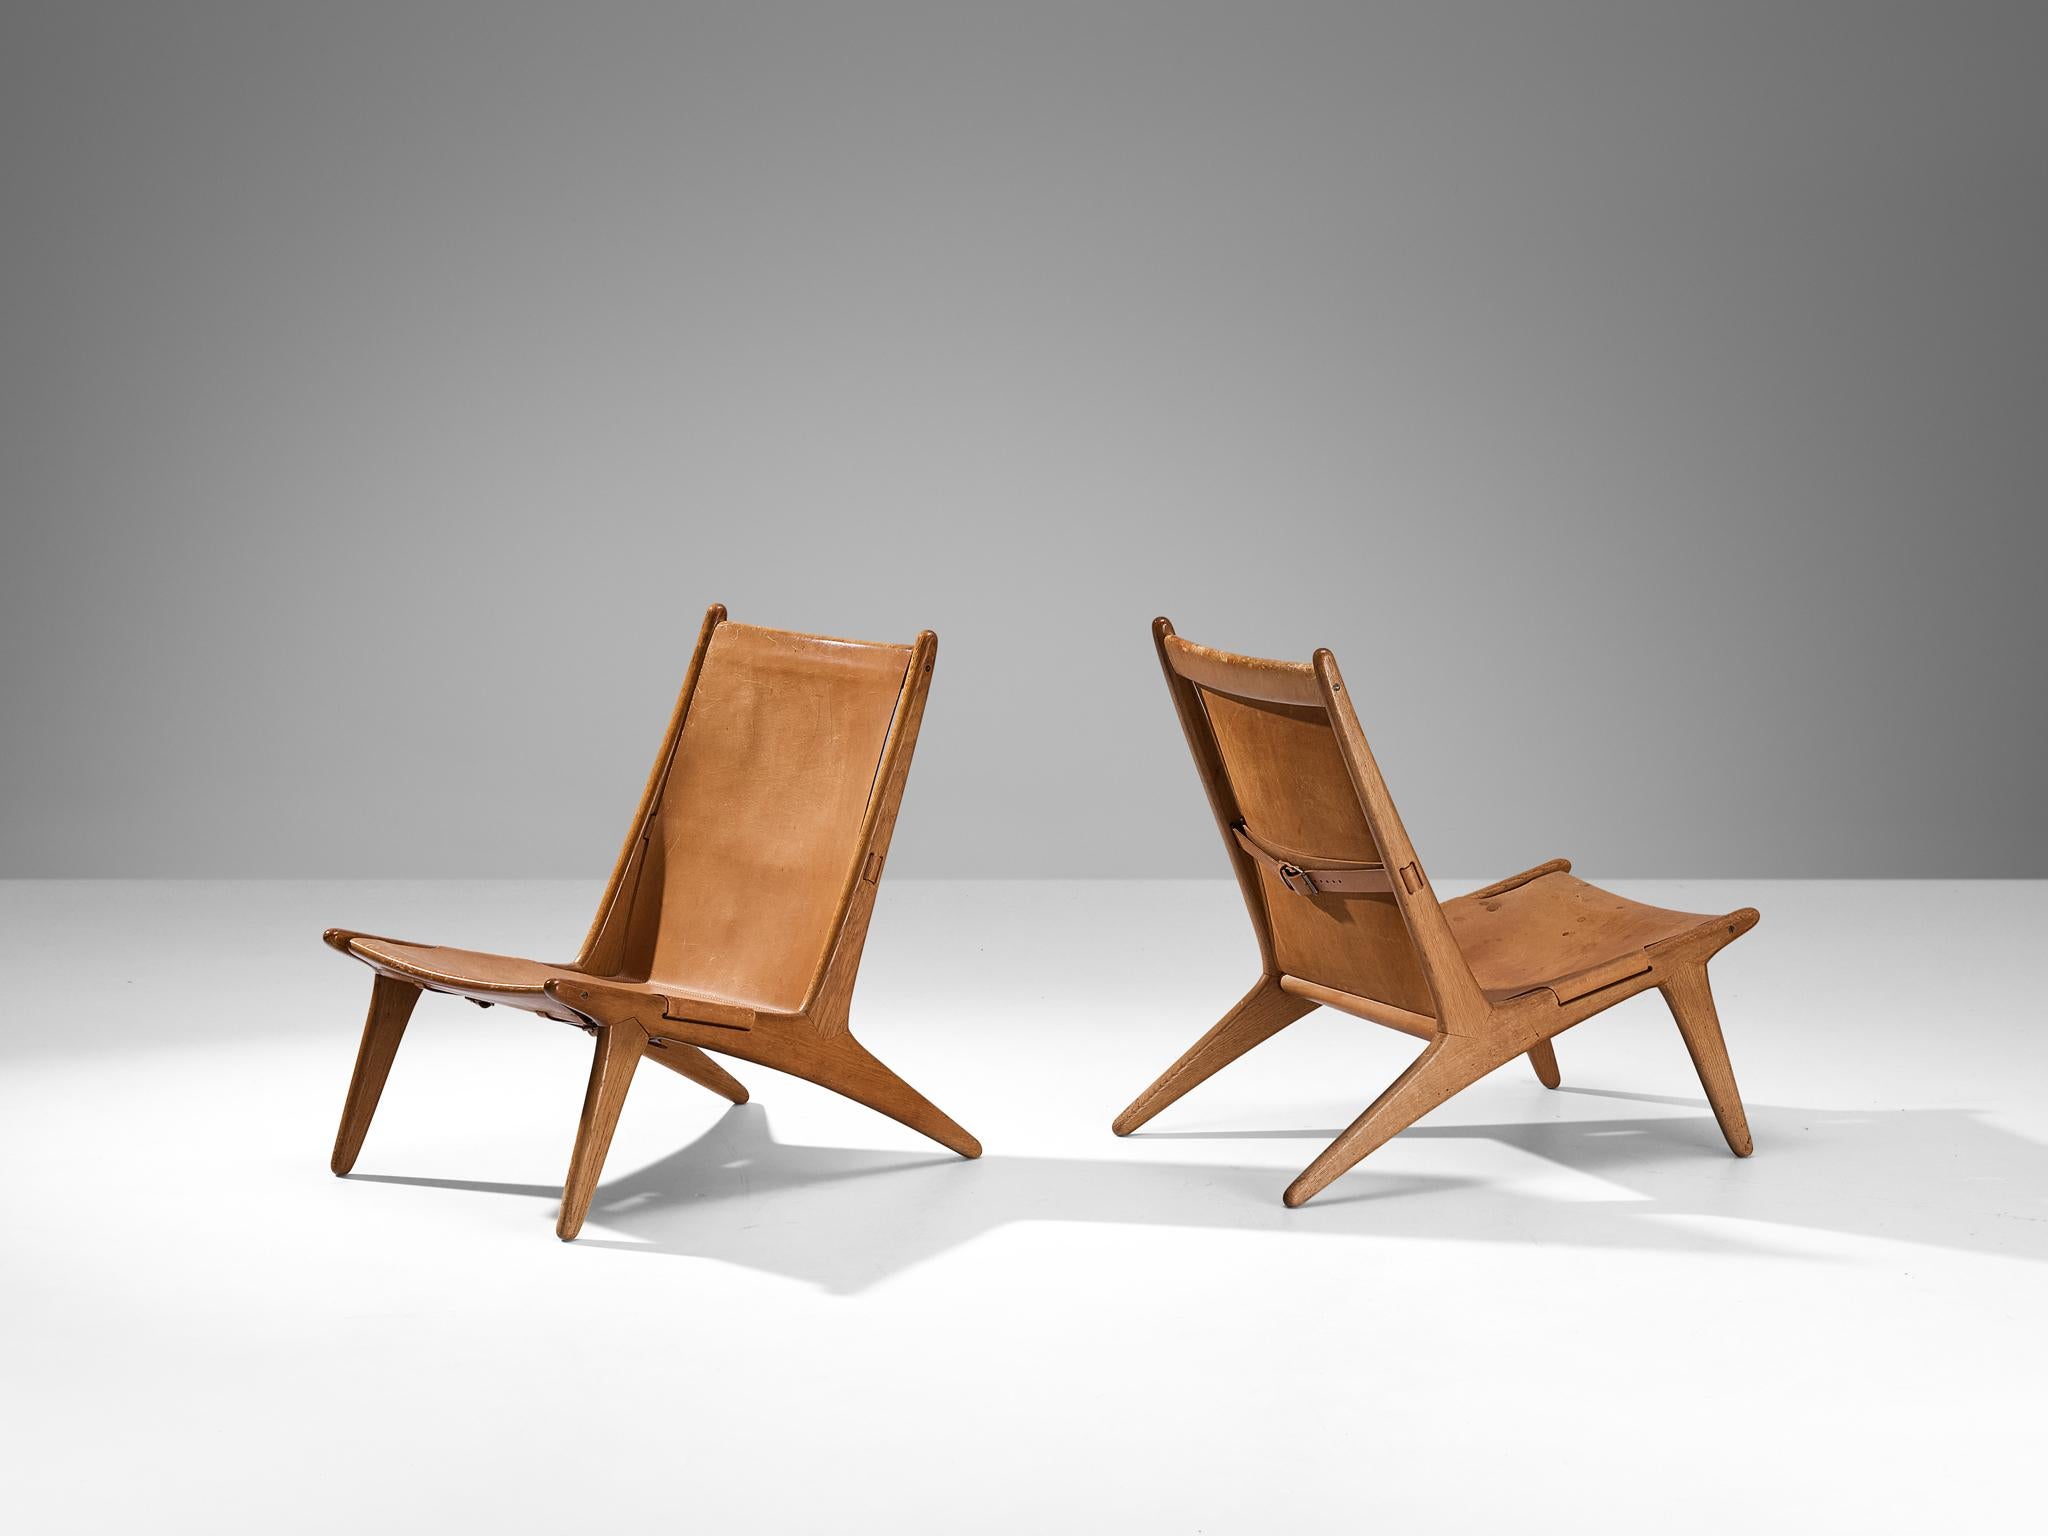 Uno & Östen Kristiansson for Luxus, pair of hunting chairs, model '204', leather, oak, Sweden, 1954

Swedish hunting chairs designed by Uno & Östen Kristiansson in the fifties. This unique design has a very strong appearance. The sleek construction